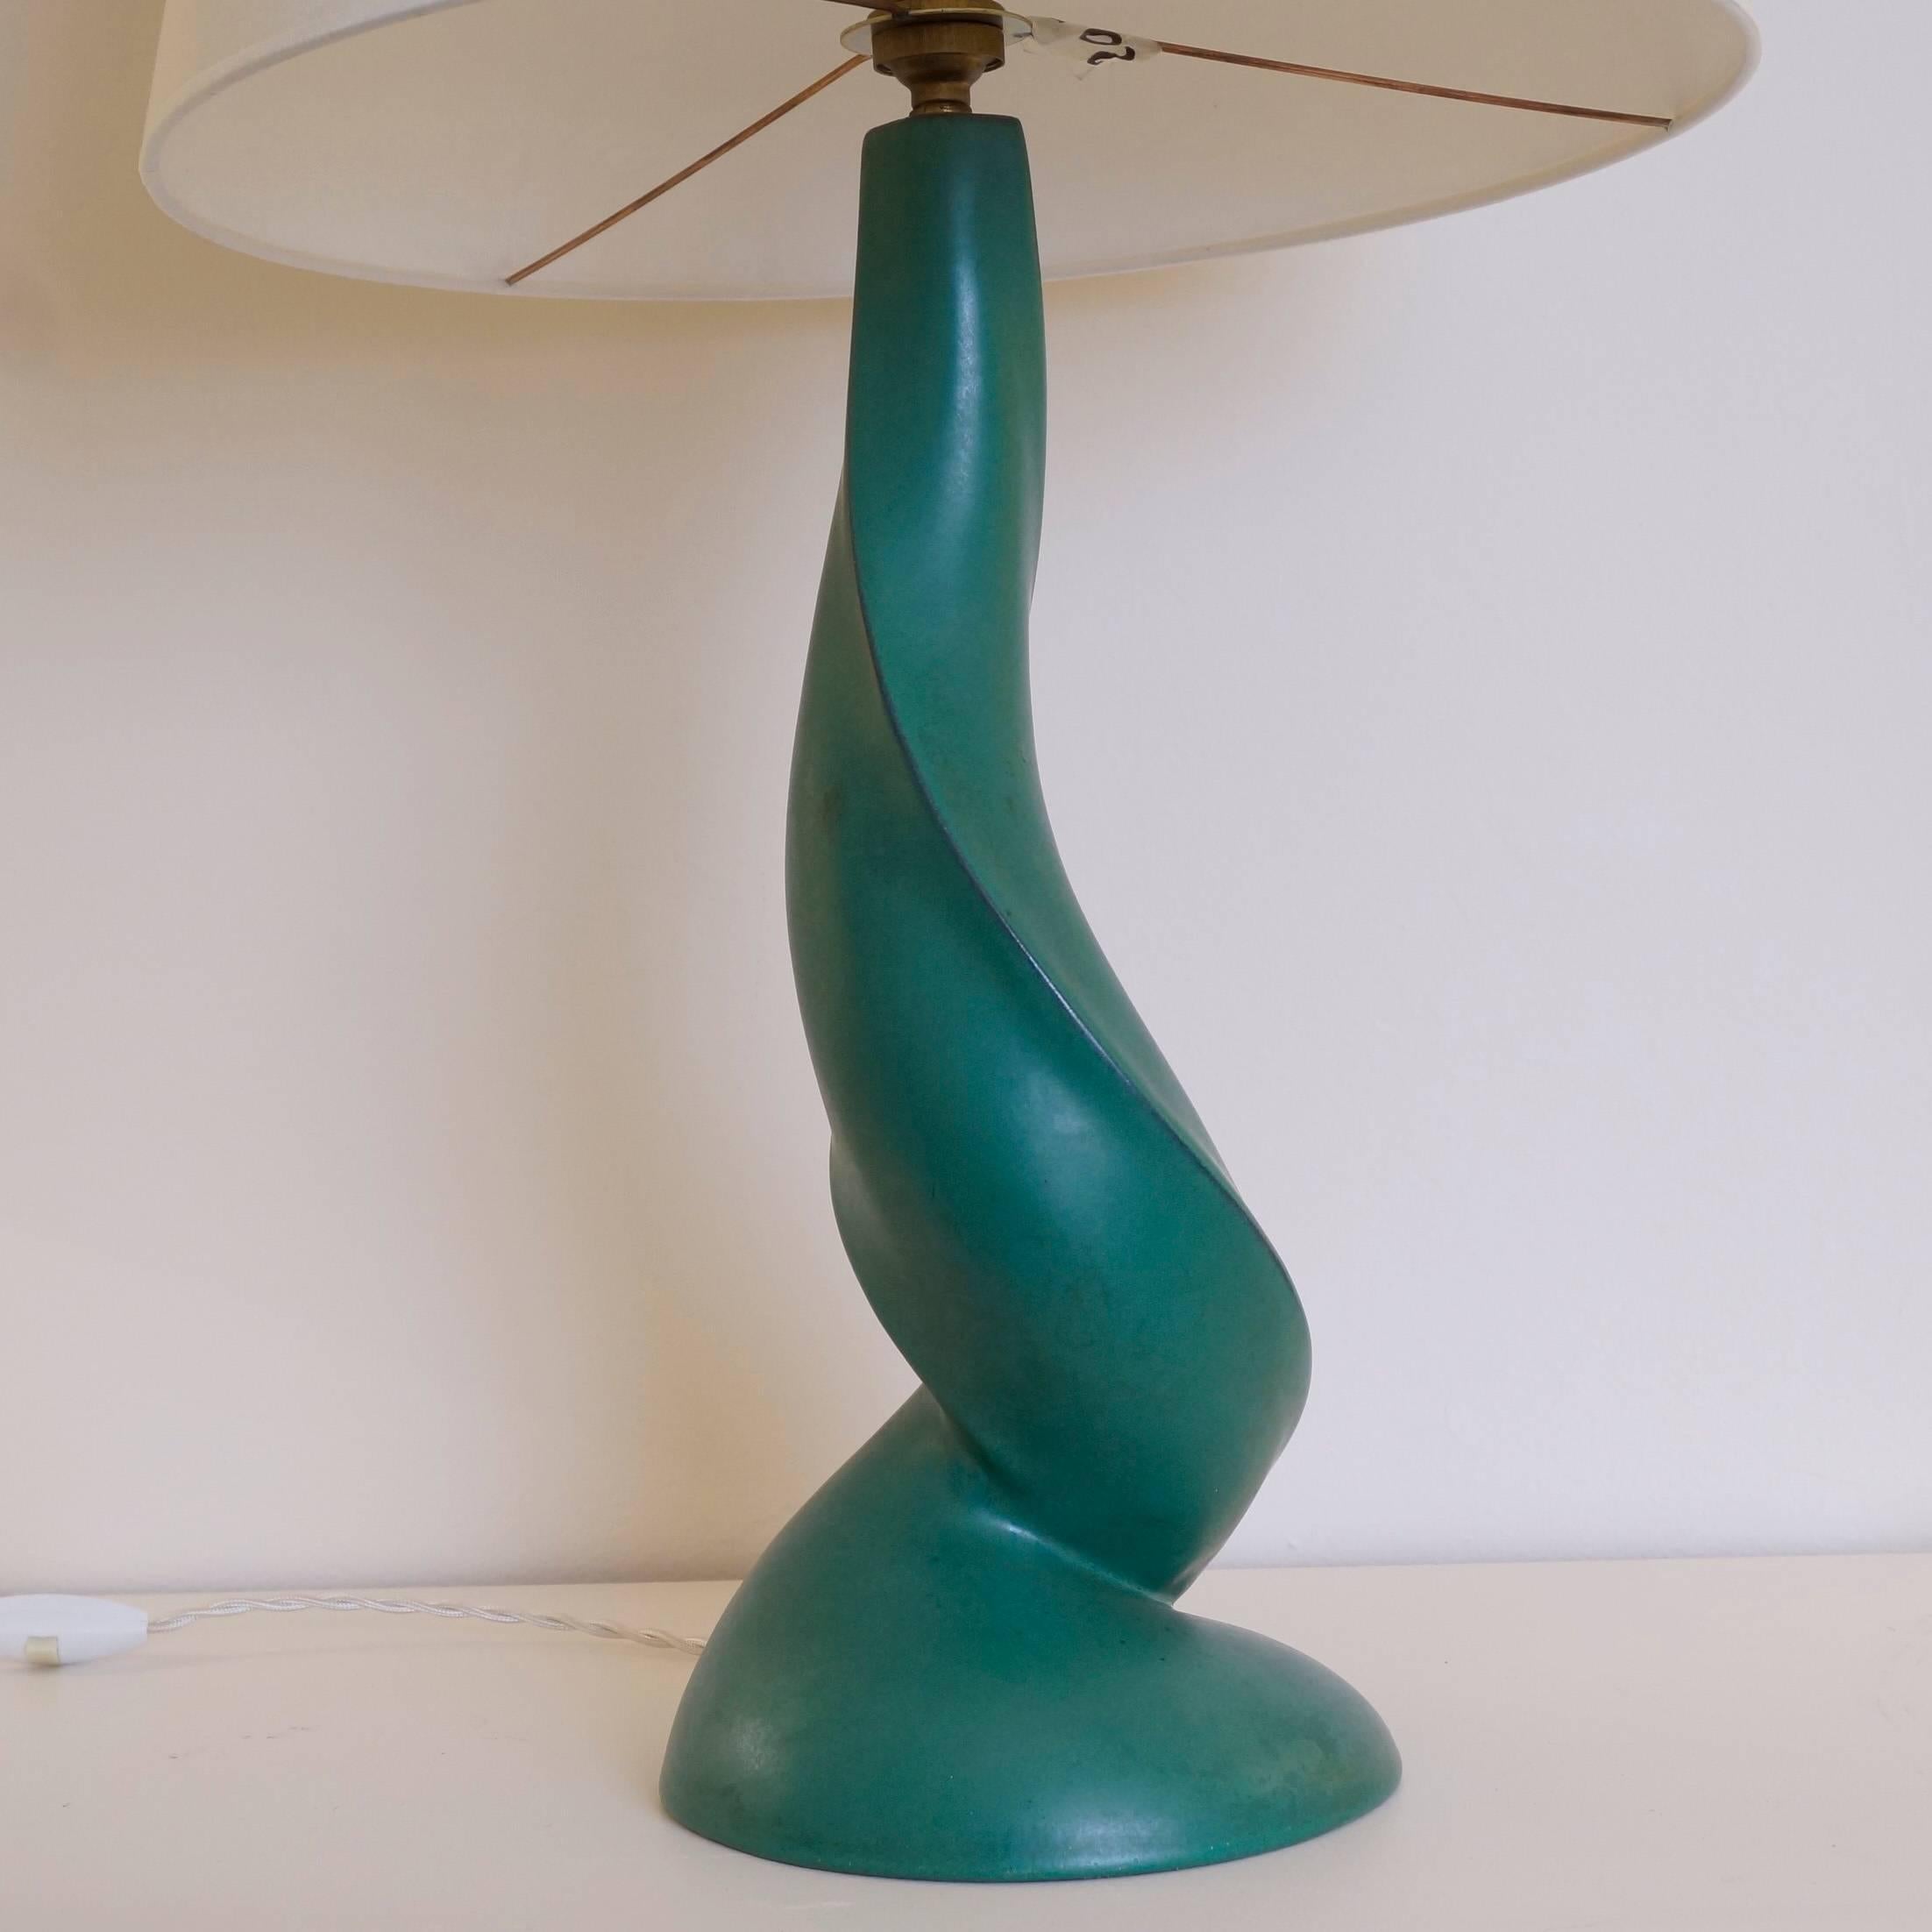 Glazed Late 20th Century Green Ceramic Table Lamp by F Cova